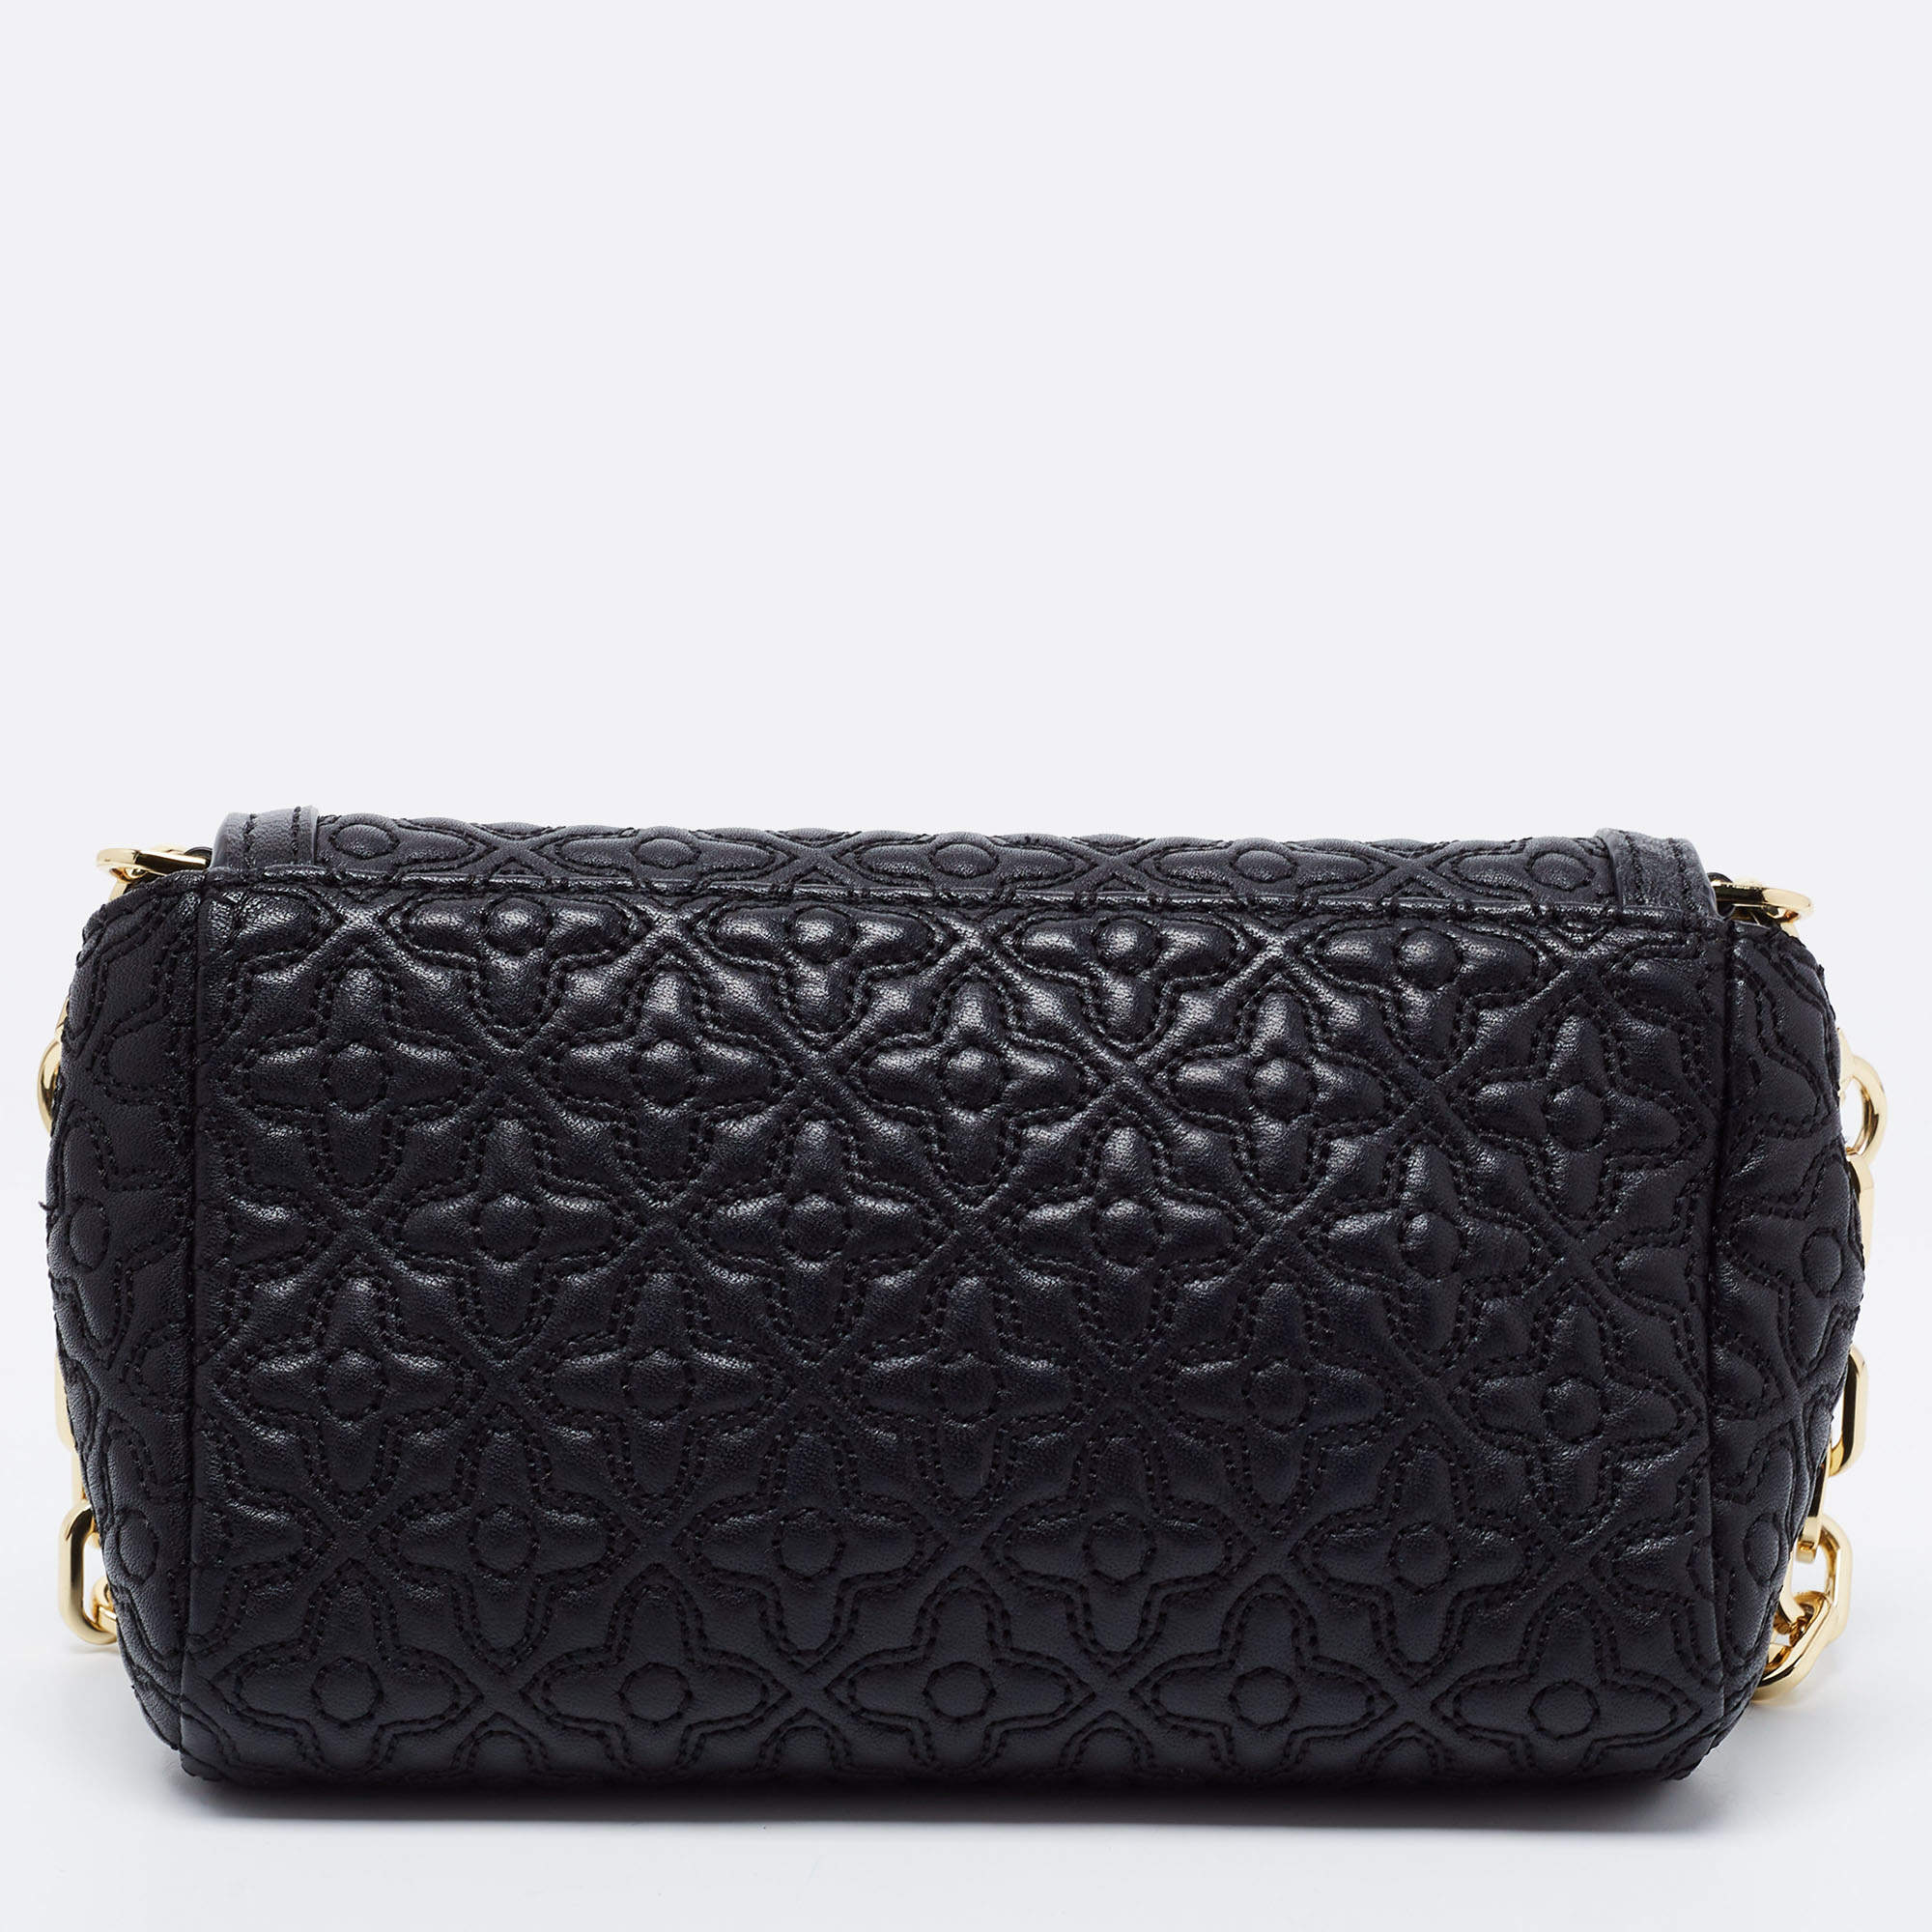 Tory Burch Black Quilted Leather Small Bryant Crossbody Bag Tory Burch | TLC